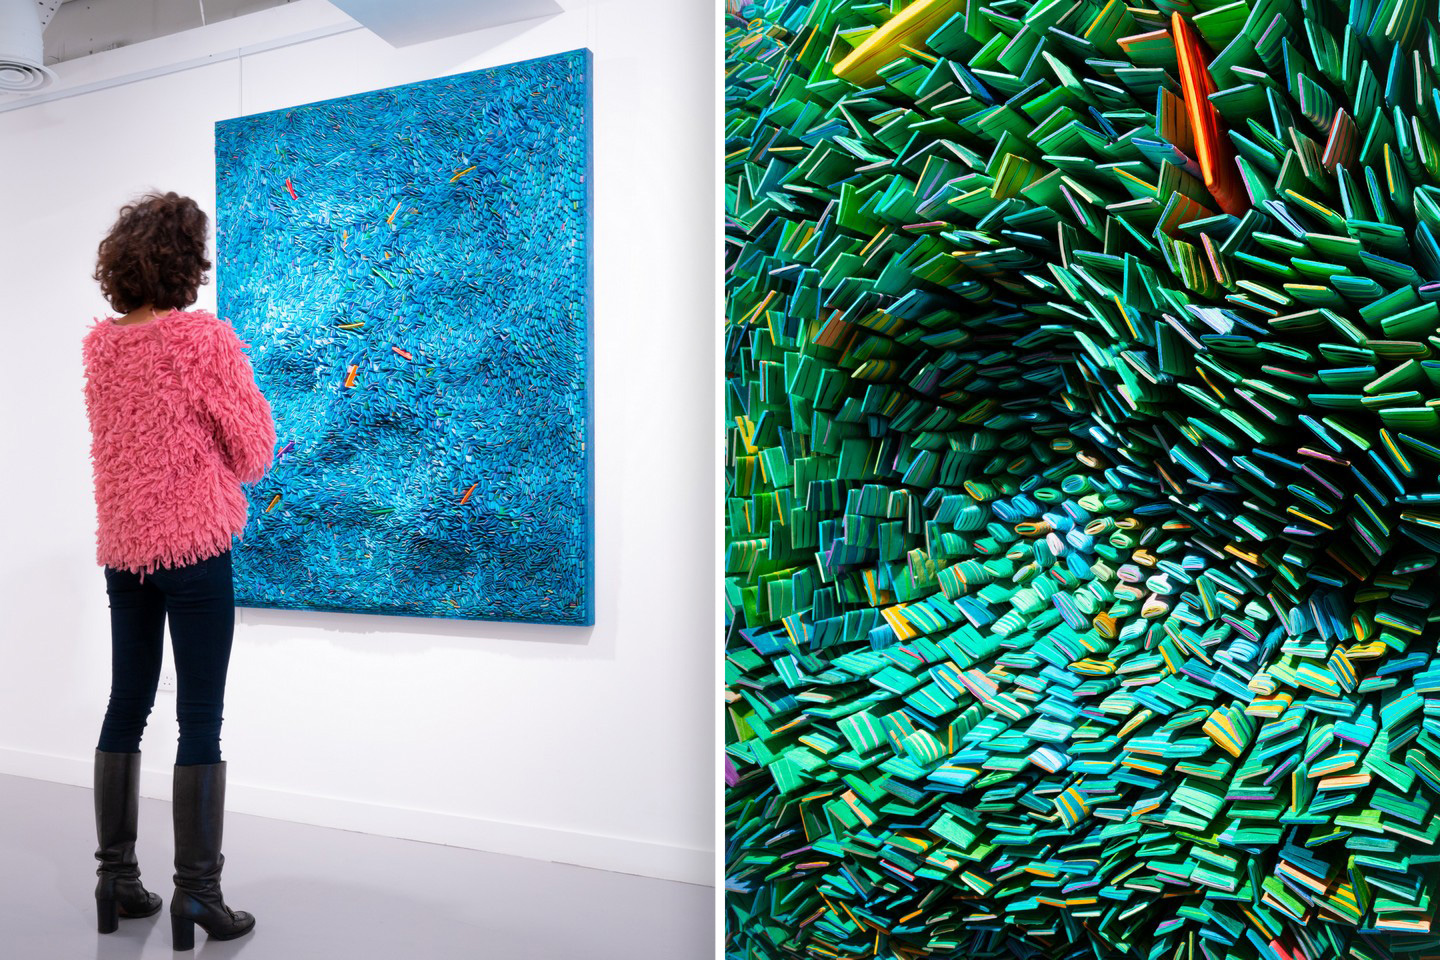 #These massive mosaics are made out of millions of hand-rolled colorful paper quills